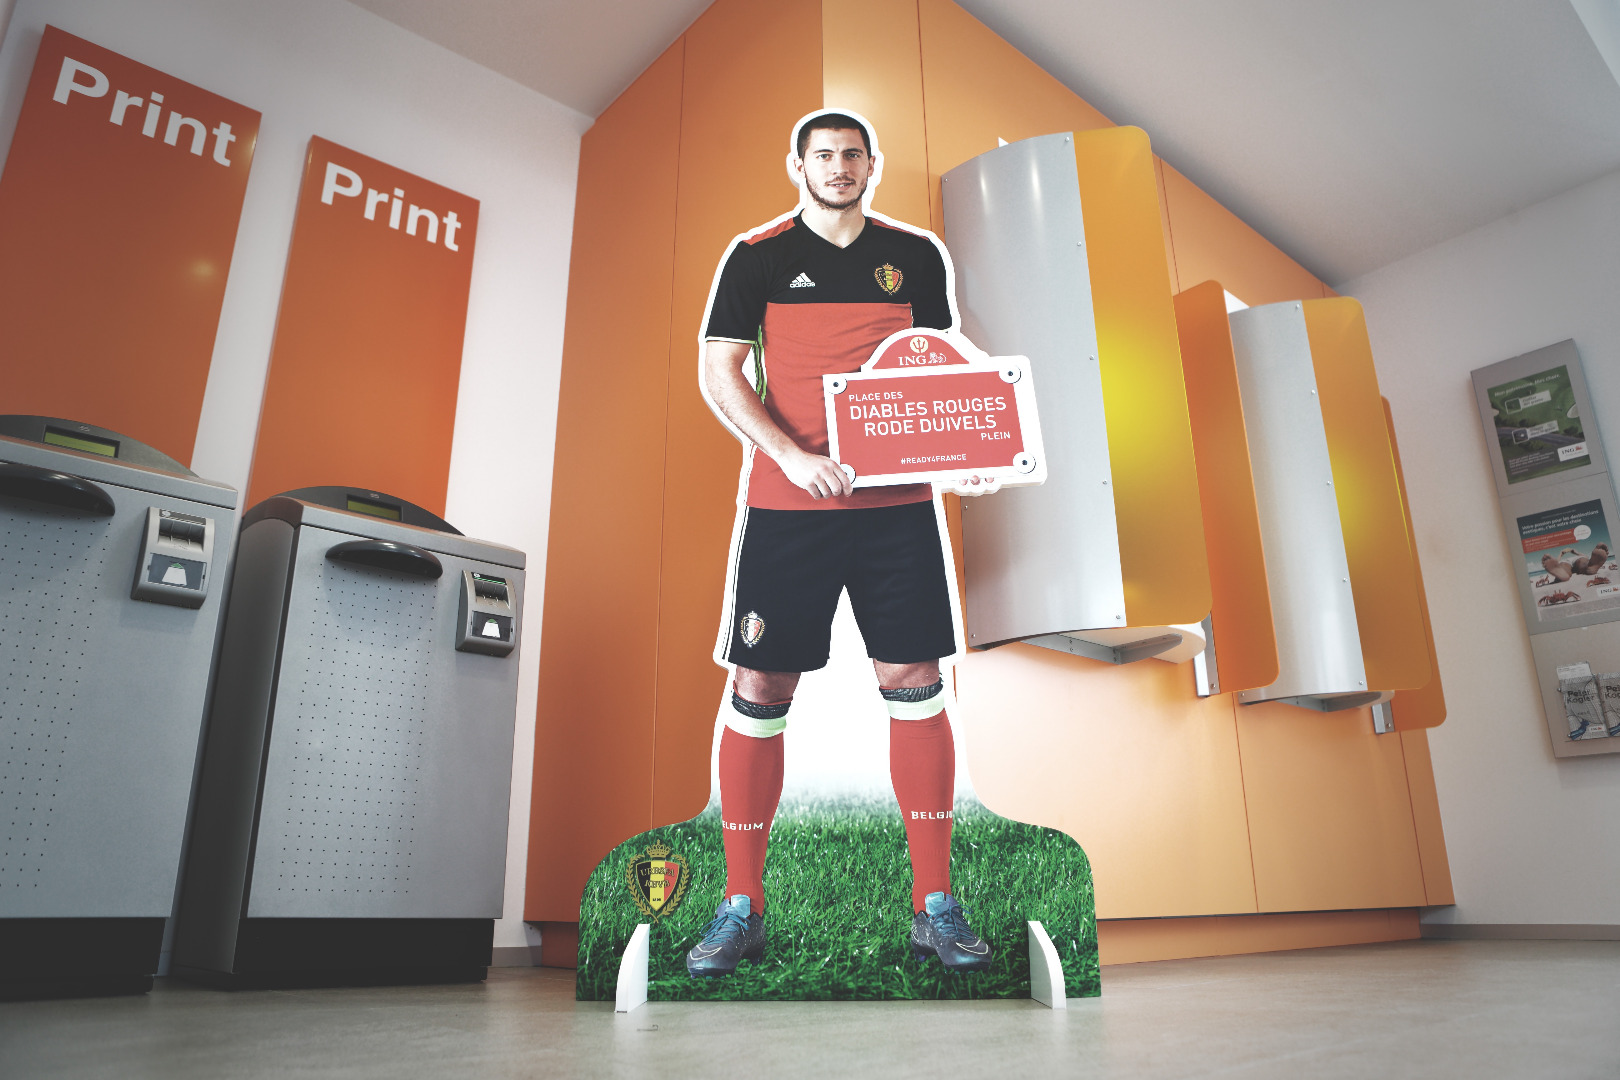 Standee - Les Diables Rouges - ING